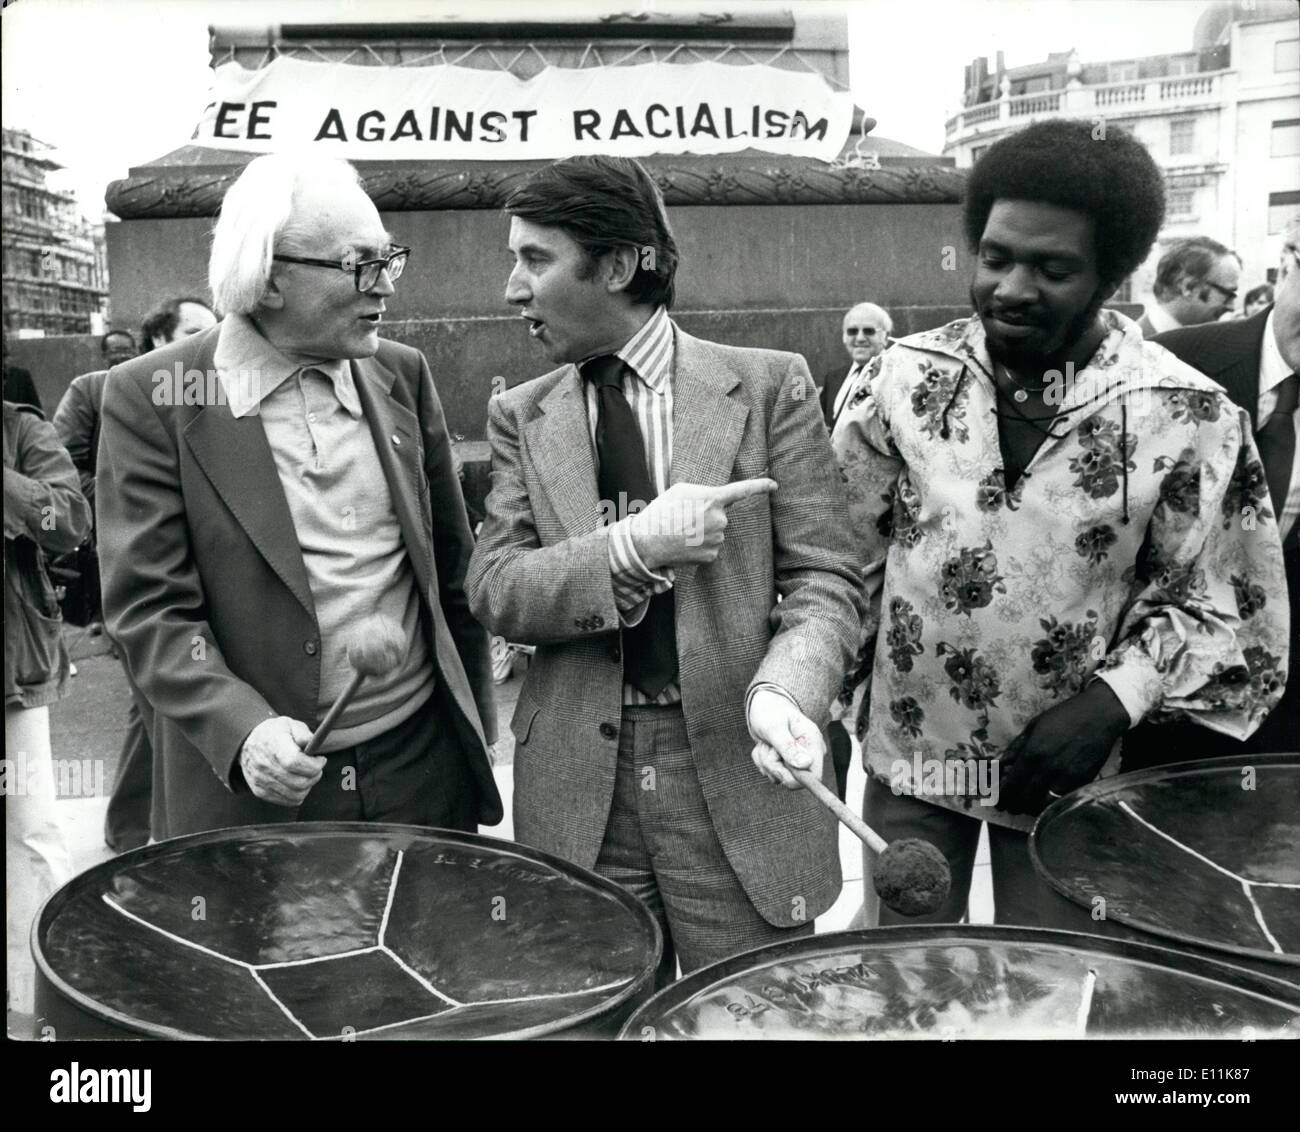 Sep. 09, 1978 - Mass Rally in Trafalgar Square Against Racialism: A steel band bringing something of a revival of Lib-Lab harmony yesterday when Mr. Michael Font, Leader of the Commons, and Mr. David Steel, the Libaral Leader, provided a musical interlude in Trafalgar Square, where they addressed a mass rally organised by the joint Committee Against Racialsm, Stock Photo